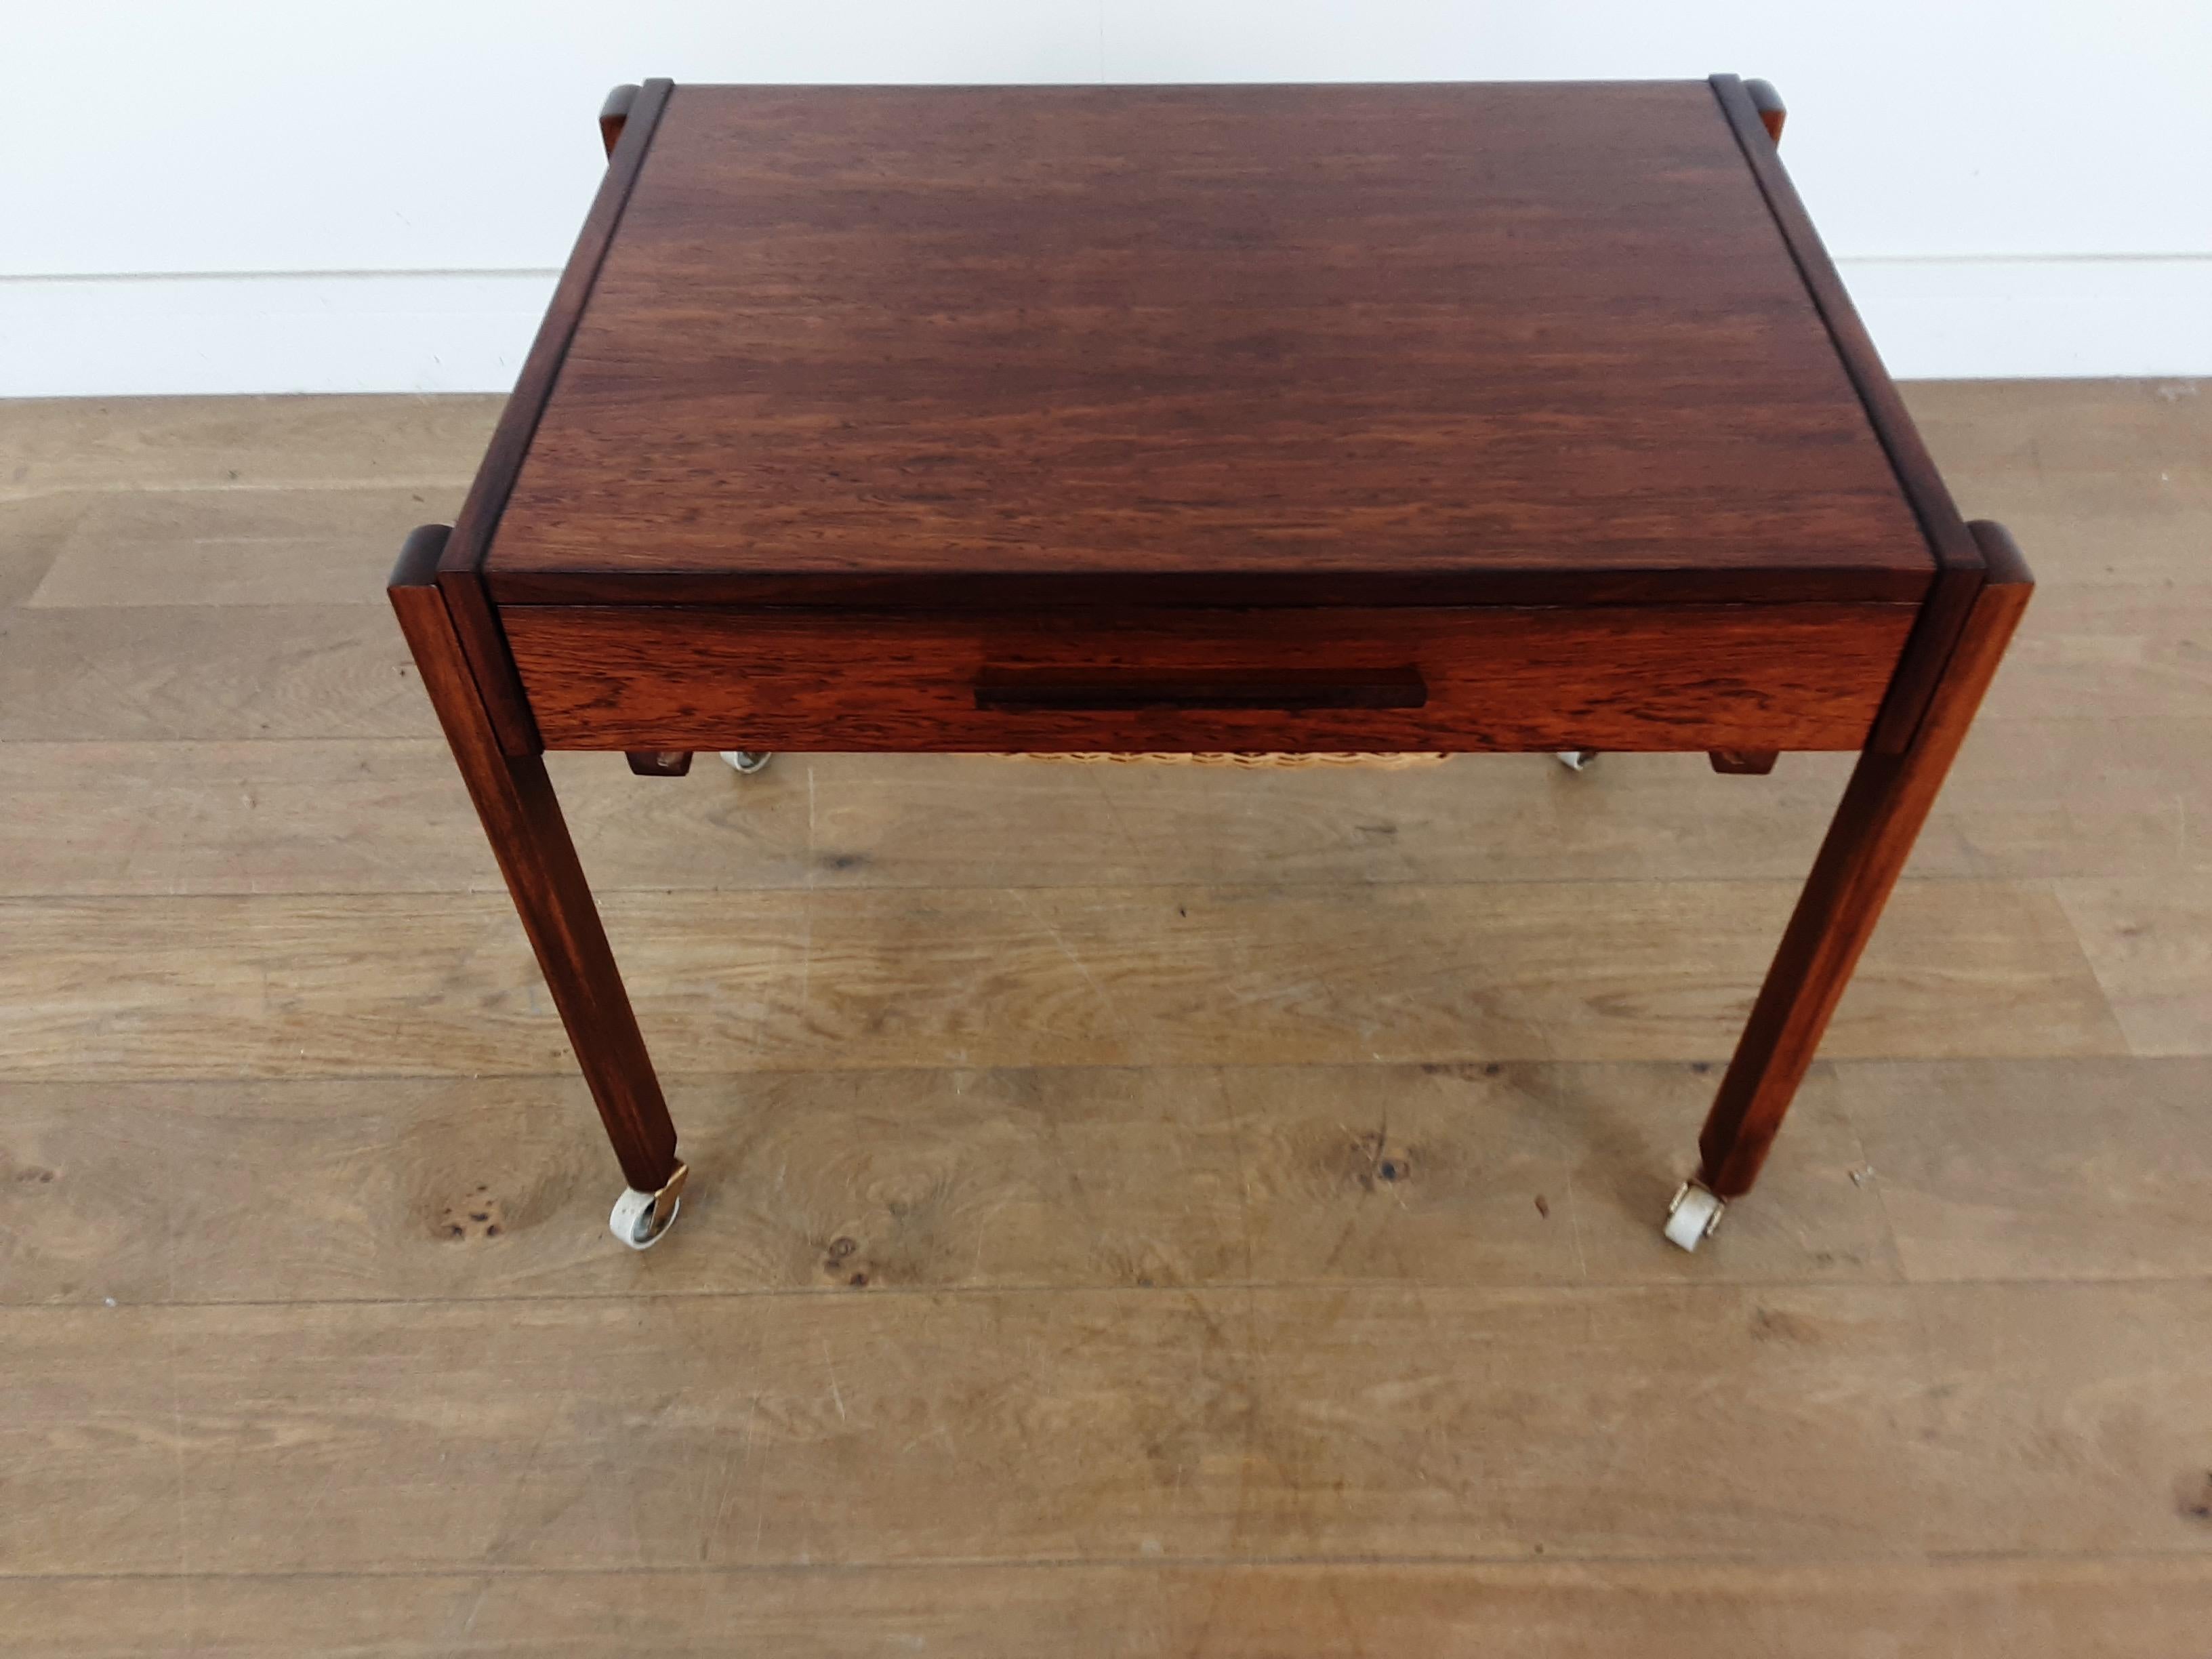 Midcentury rosewood sewing table, or work table.
A very practical table with two drawers, the lower drawer with inset wicker basket, the top drawer sectioned for storage.
On caster for easy mobility.
Measures: 52 cm H 67.5 cm W 46 cm D tabletop